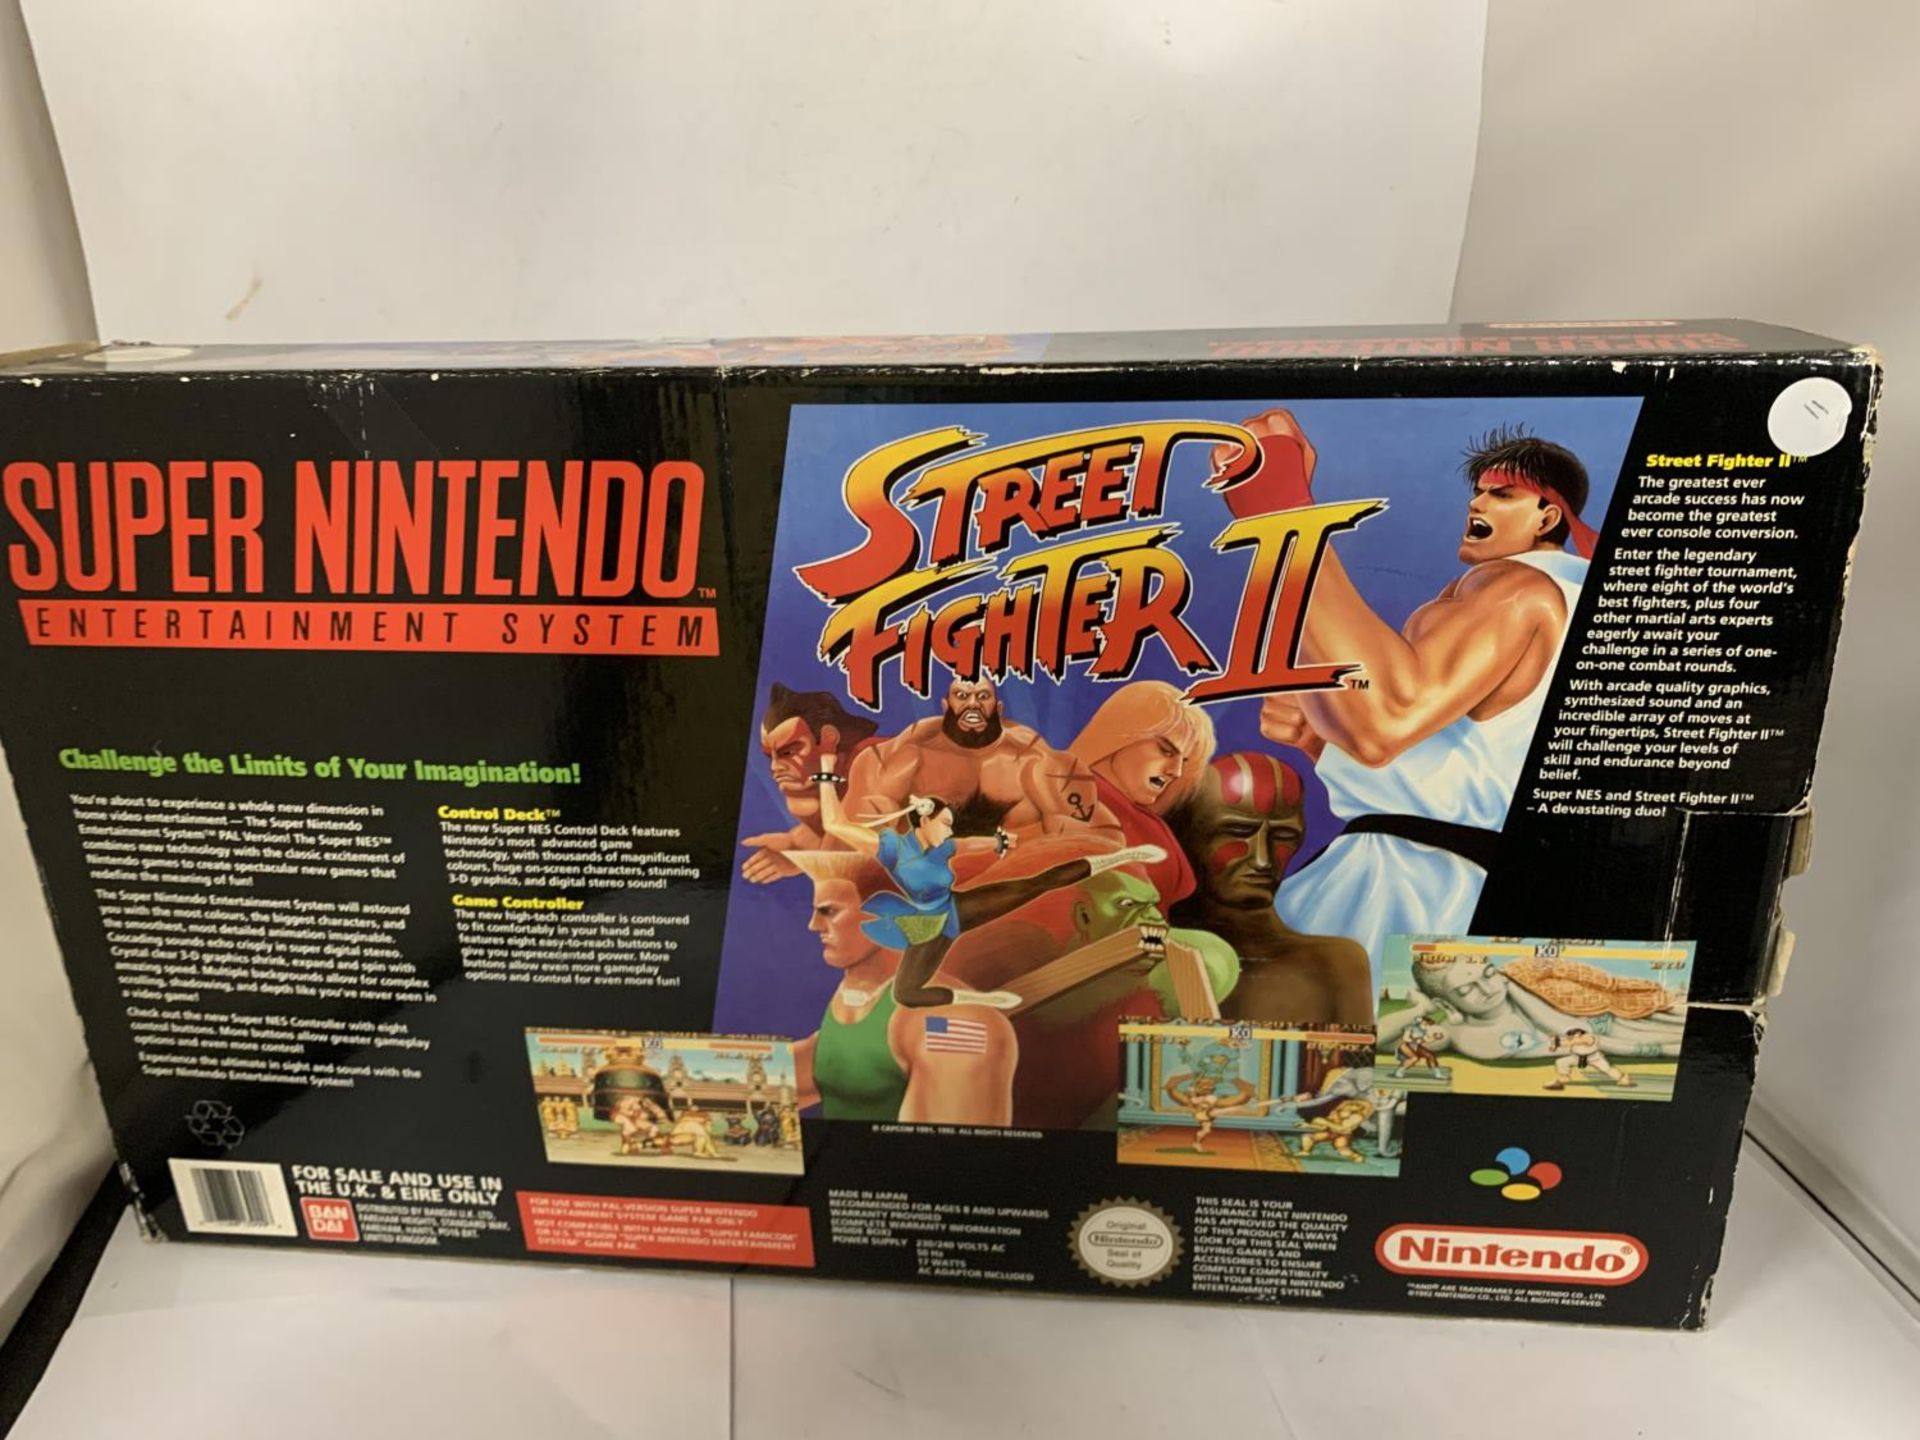 A SUPER NINTENDO ENTERTAINMENT SYSTEM INCLUDING THE WORLD'S GREATEST ARCADE HIT STREET FIGHTER II - Image 3 of 3